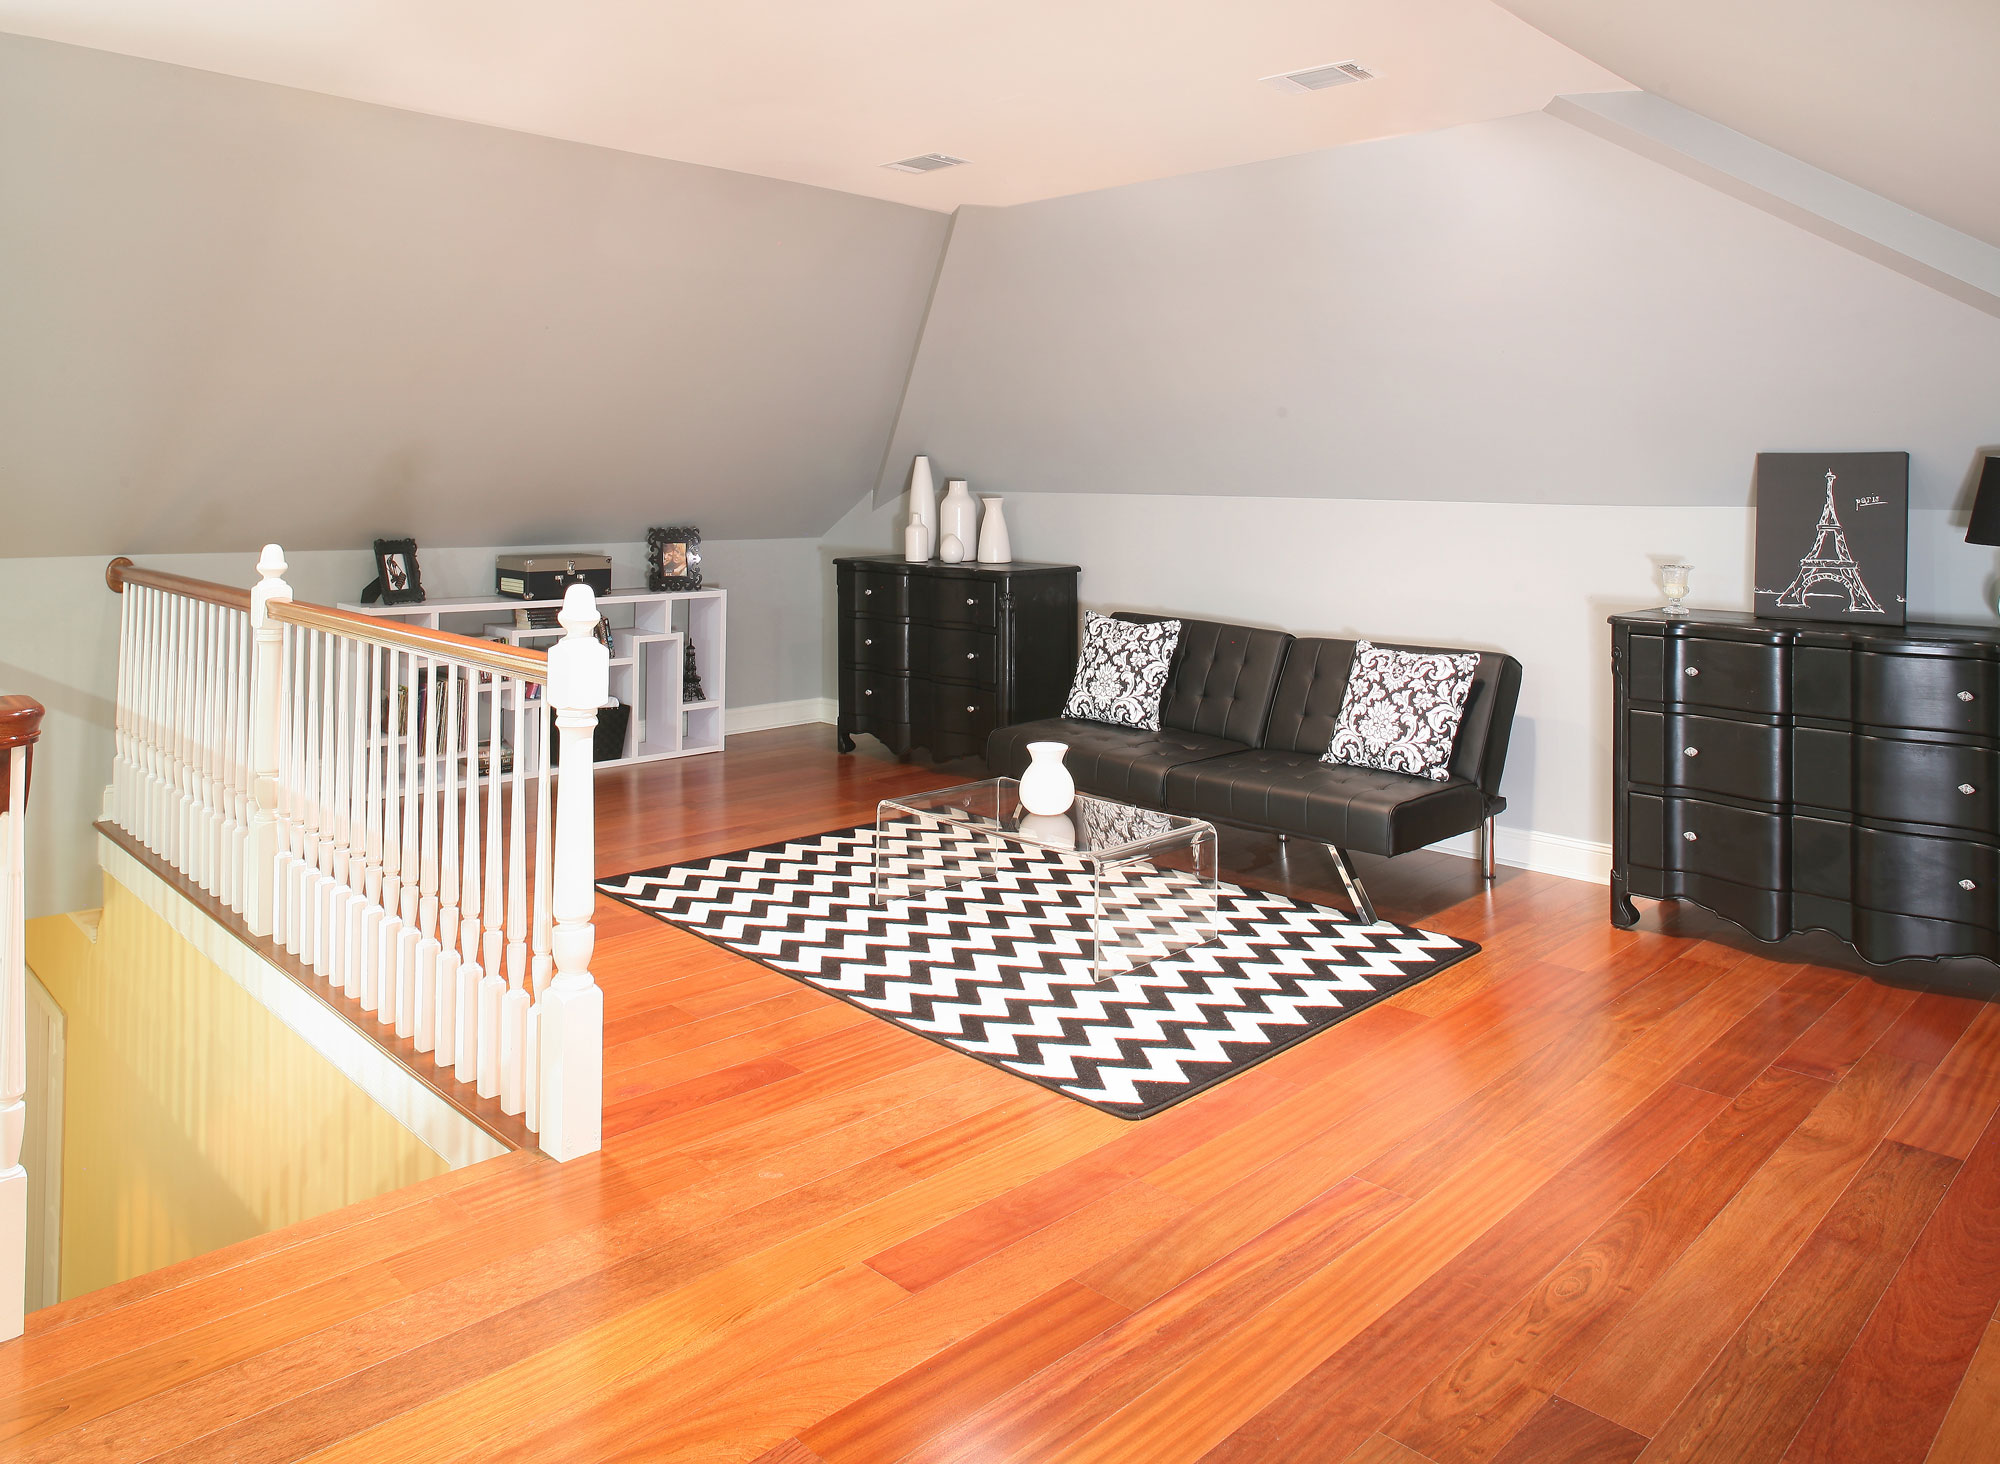 Attic conversion to kids/teens lounge space.